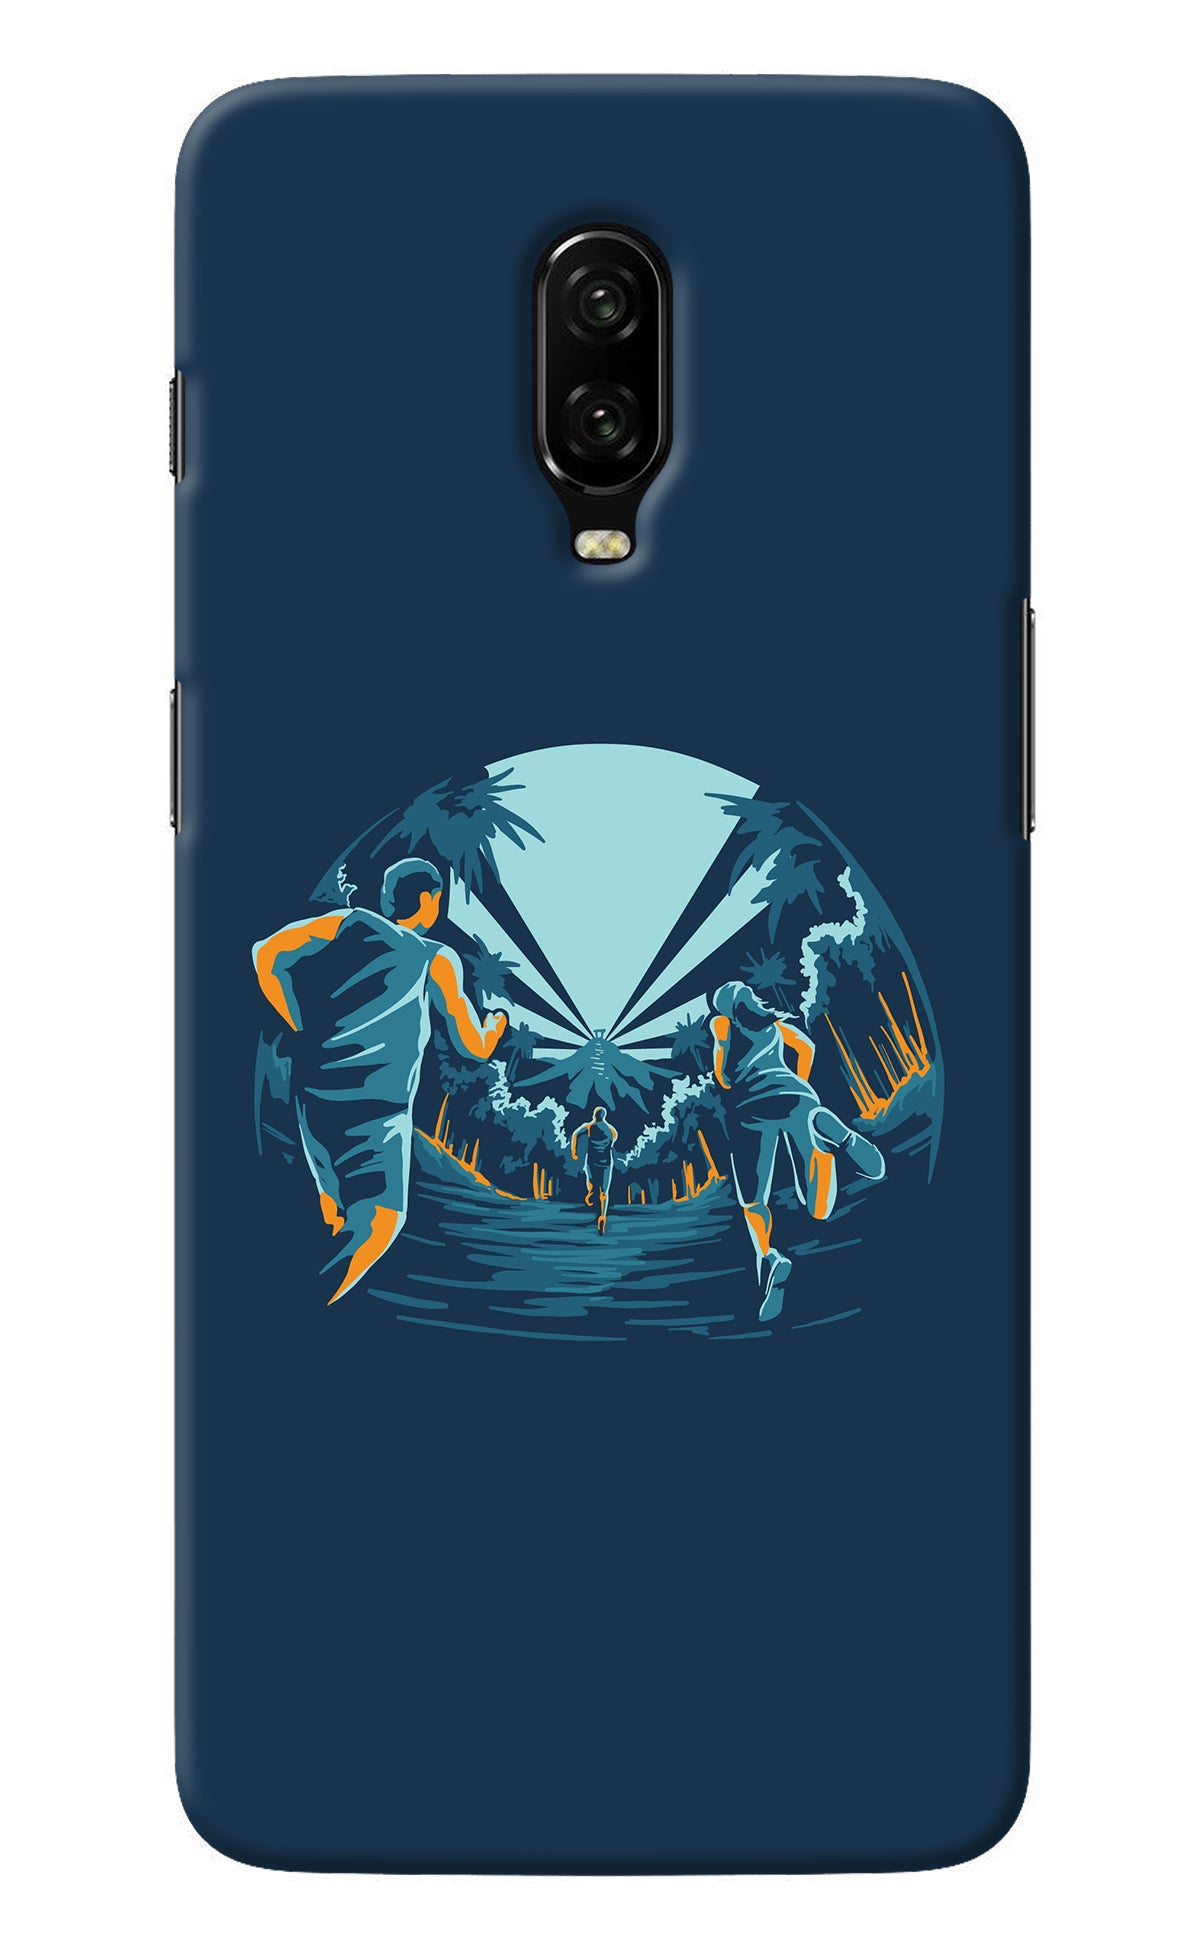 Team Run Oneplus 6T Back Cover